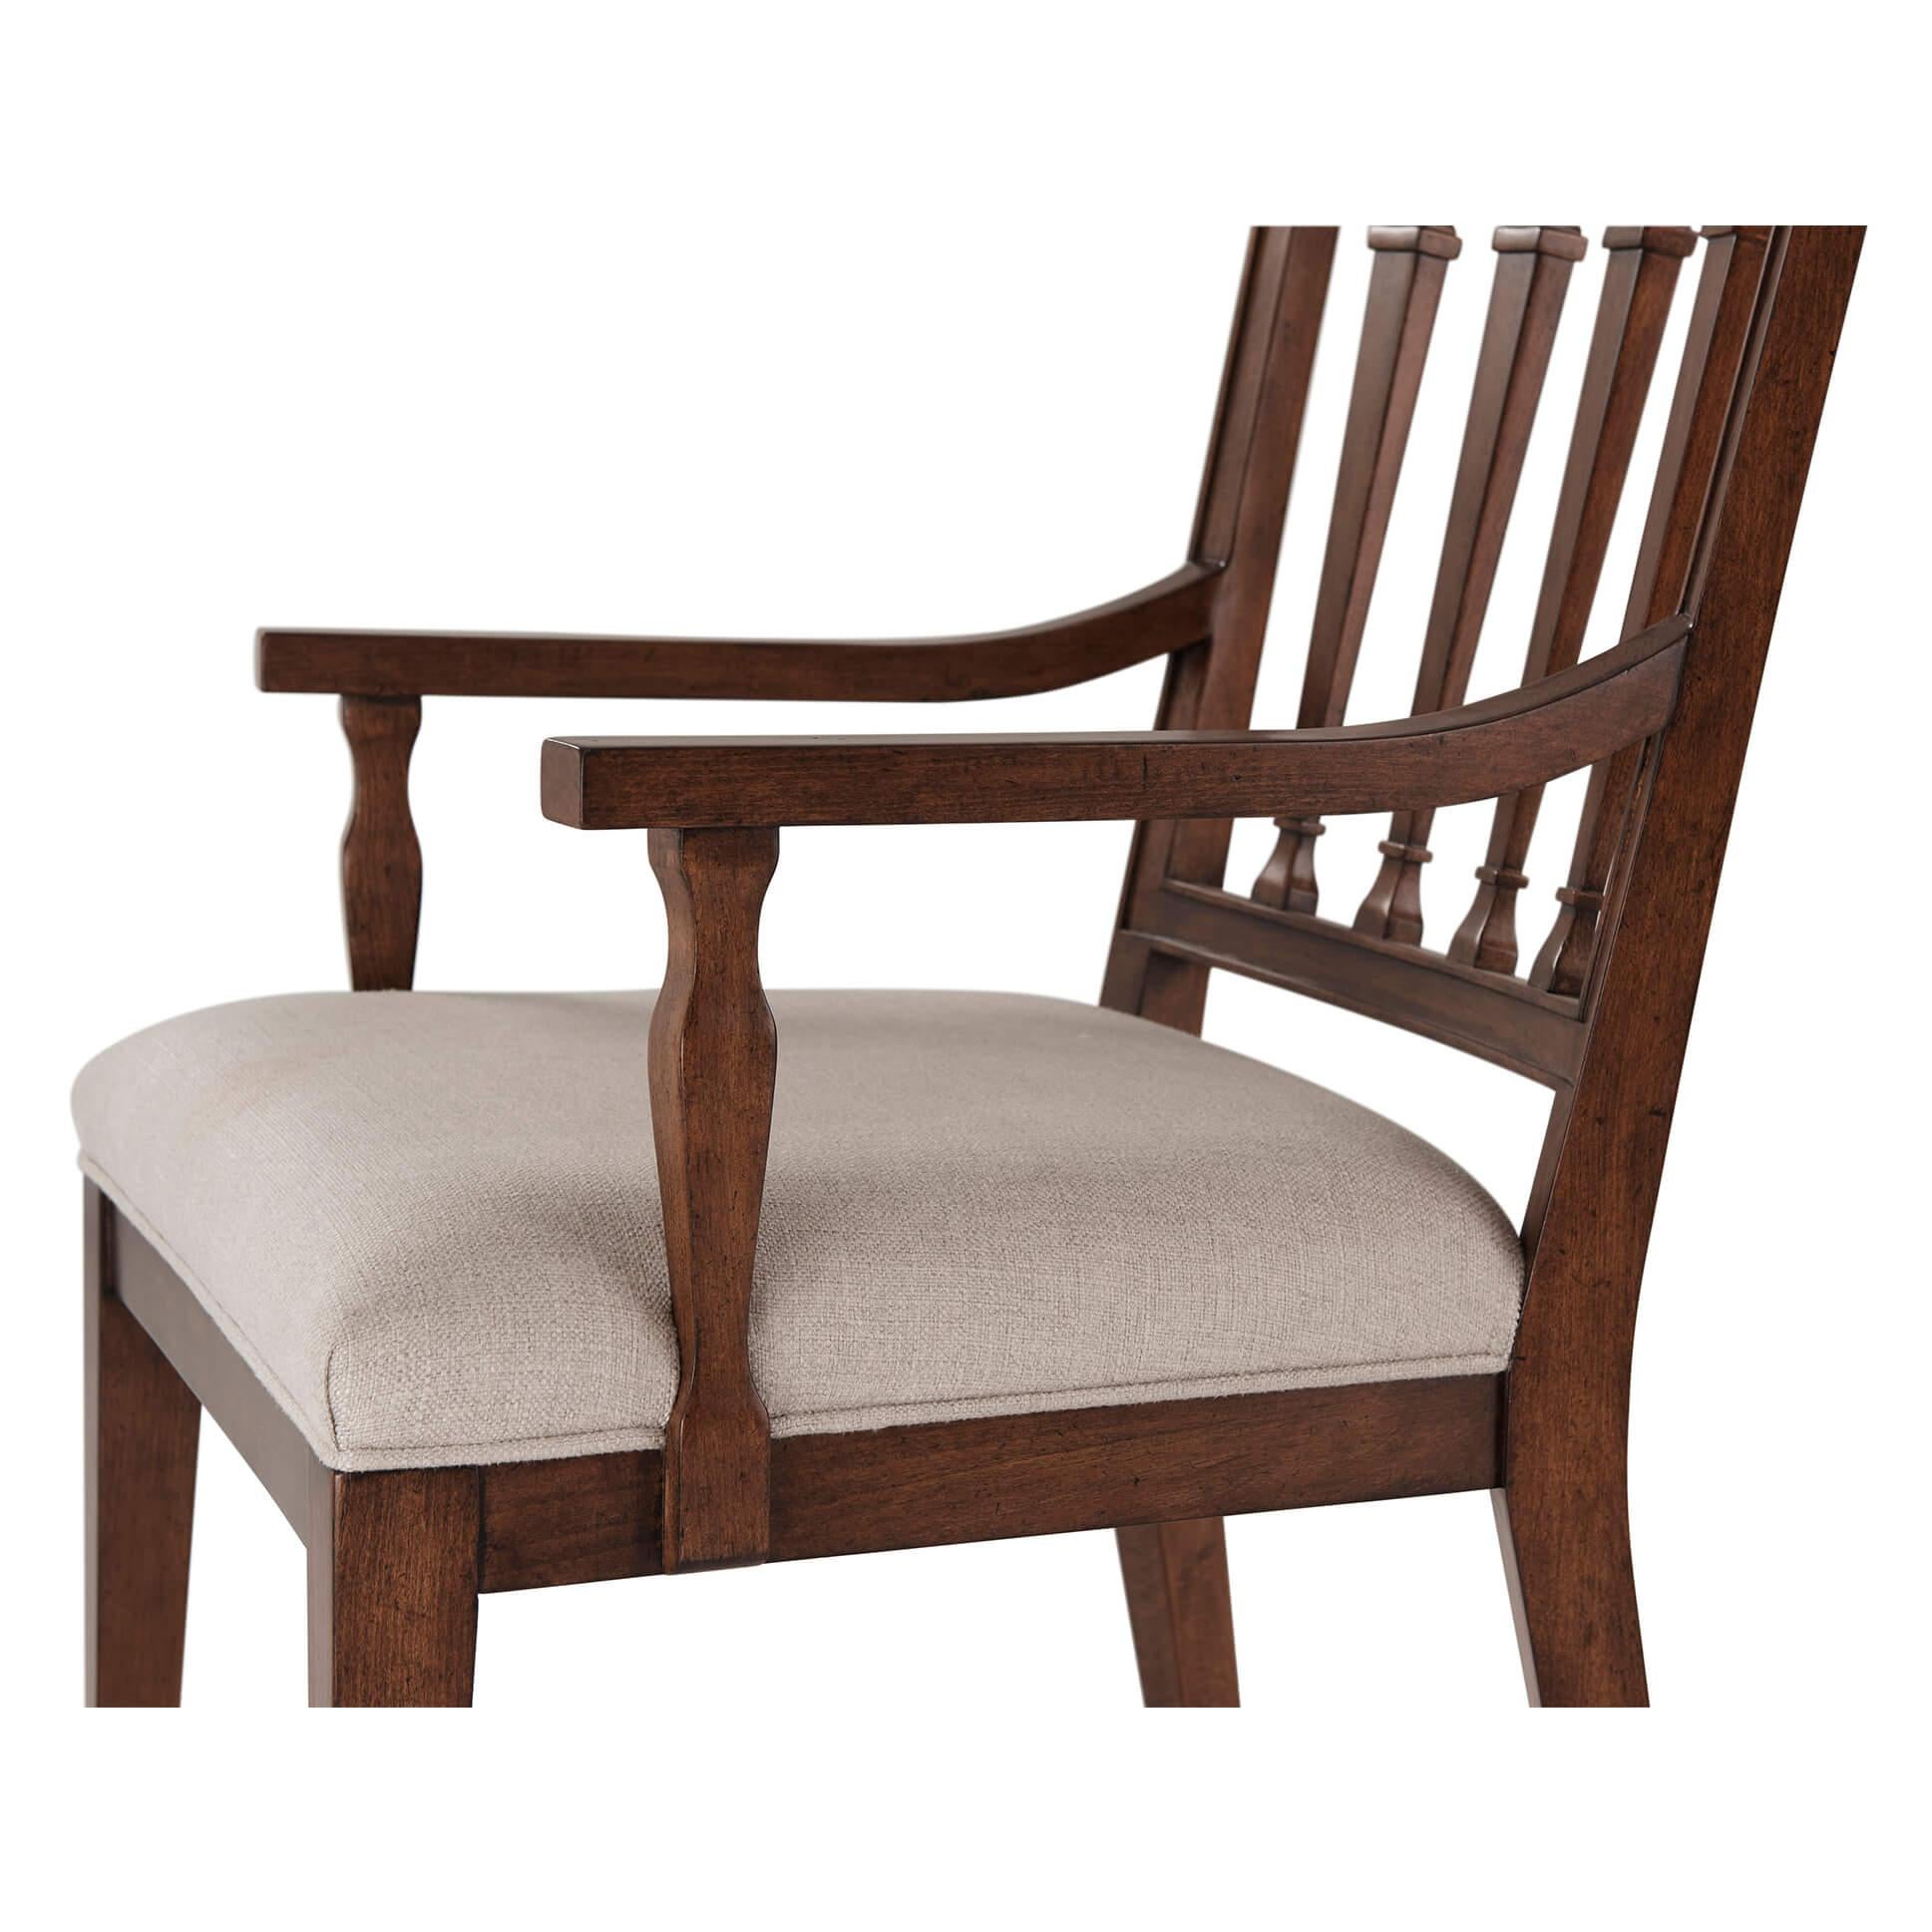 Vietnamese Classic English Dining Chairs For Sale